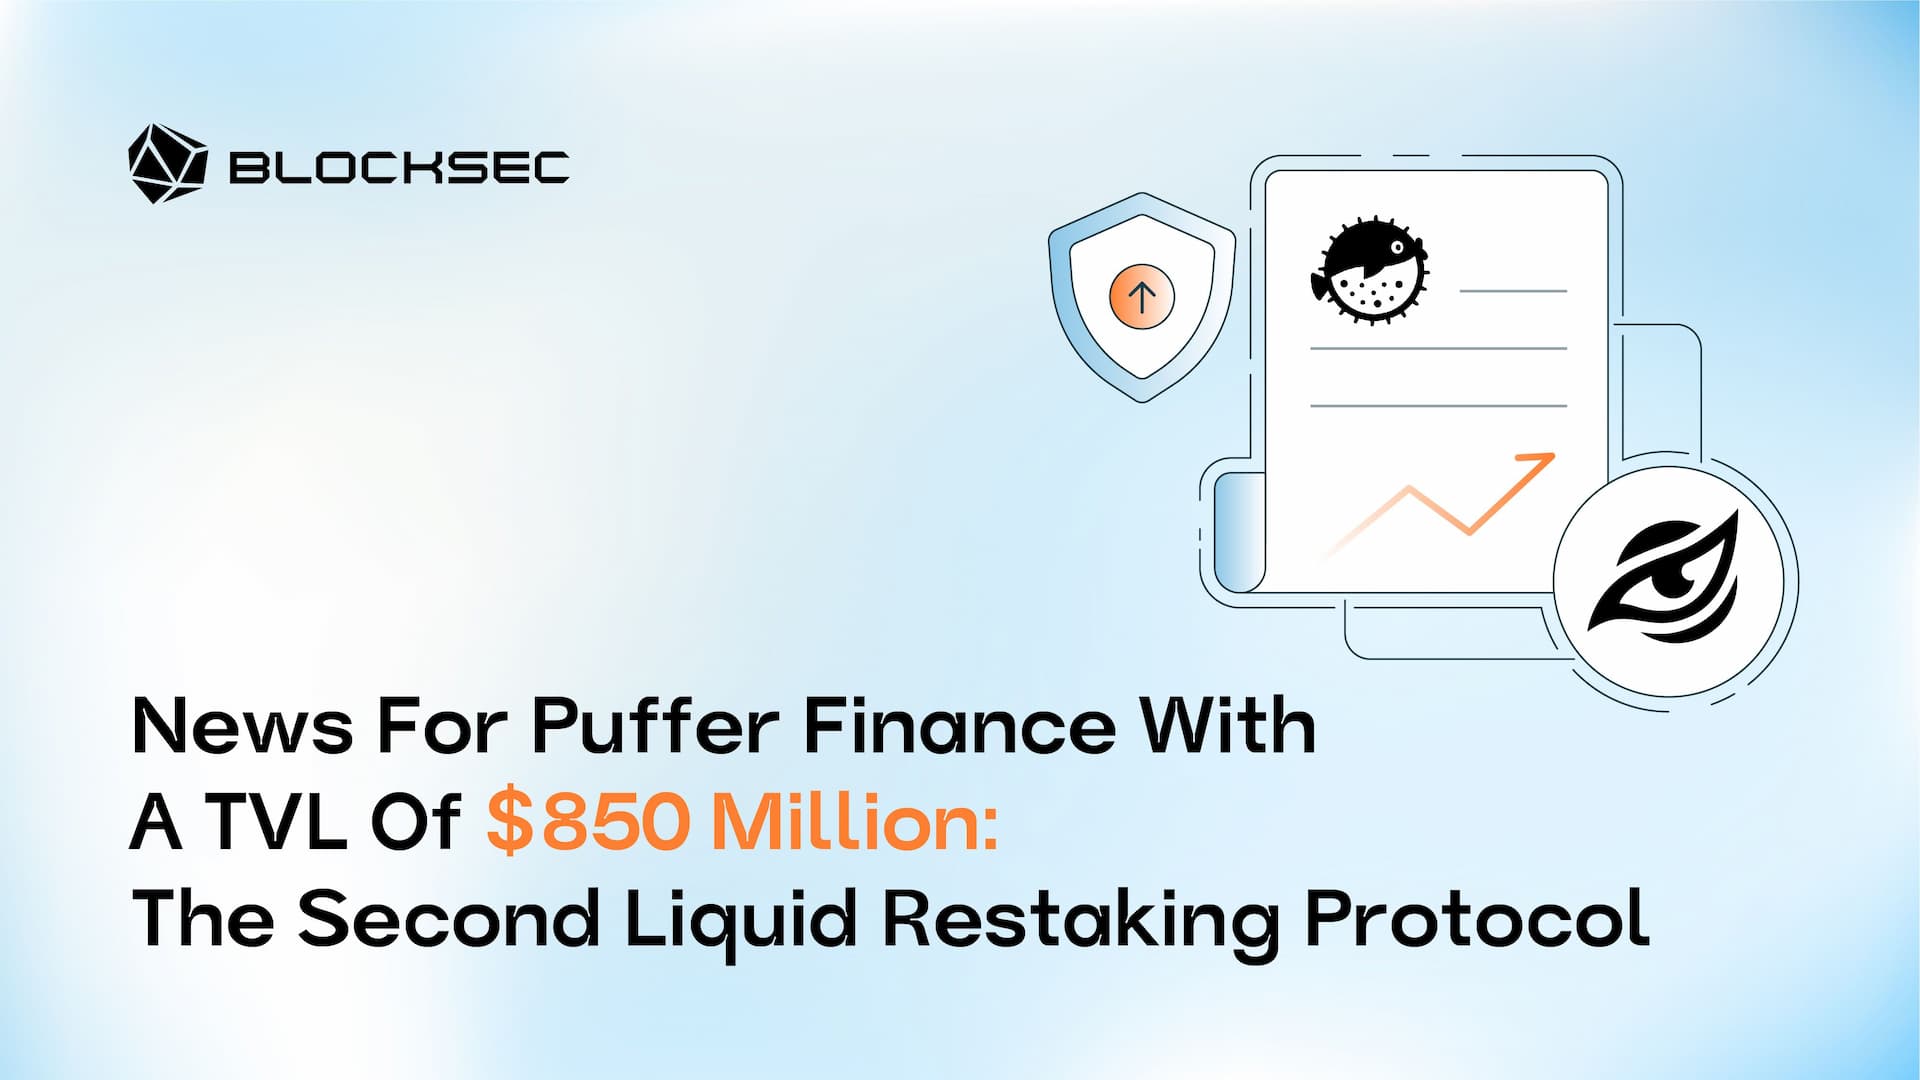 News for Puffer Finance With a TVL of $850 Million: The Second Liquid Restaking Protocol